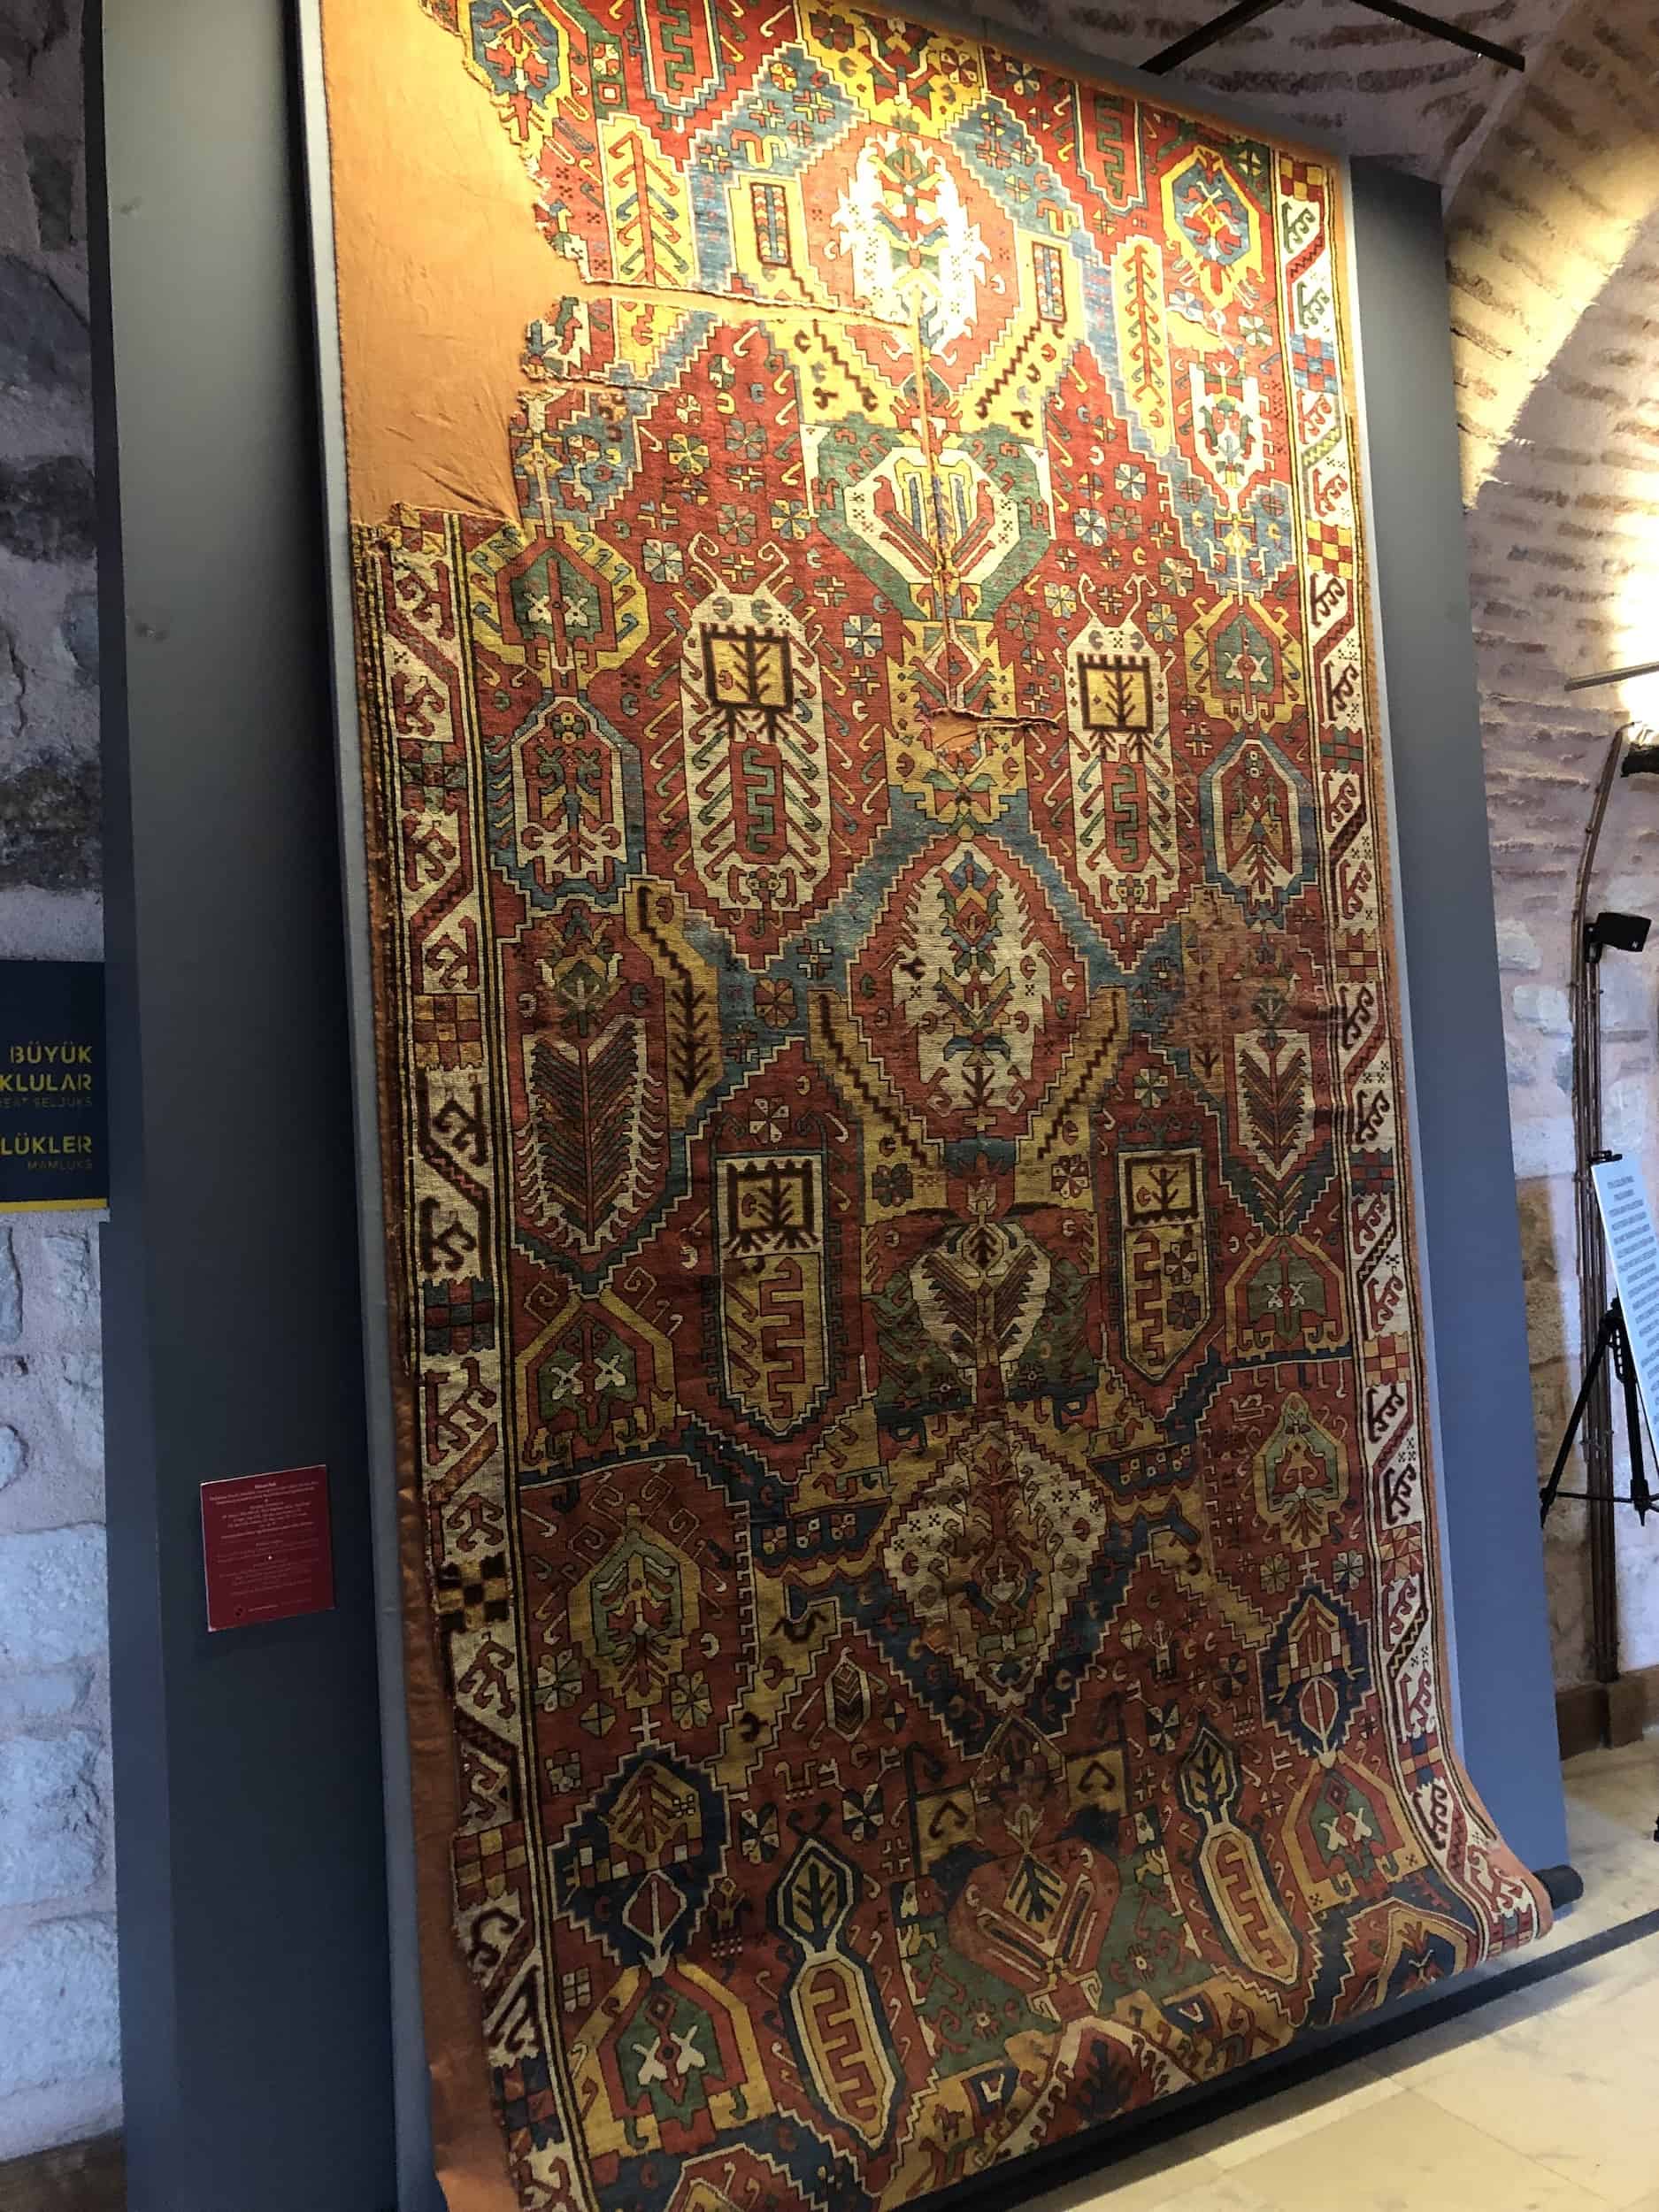 Seljuk carpet at the Museum of Turkish and Islamic Arts in Istanbul, Turkey